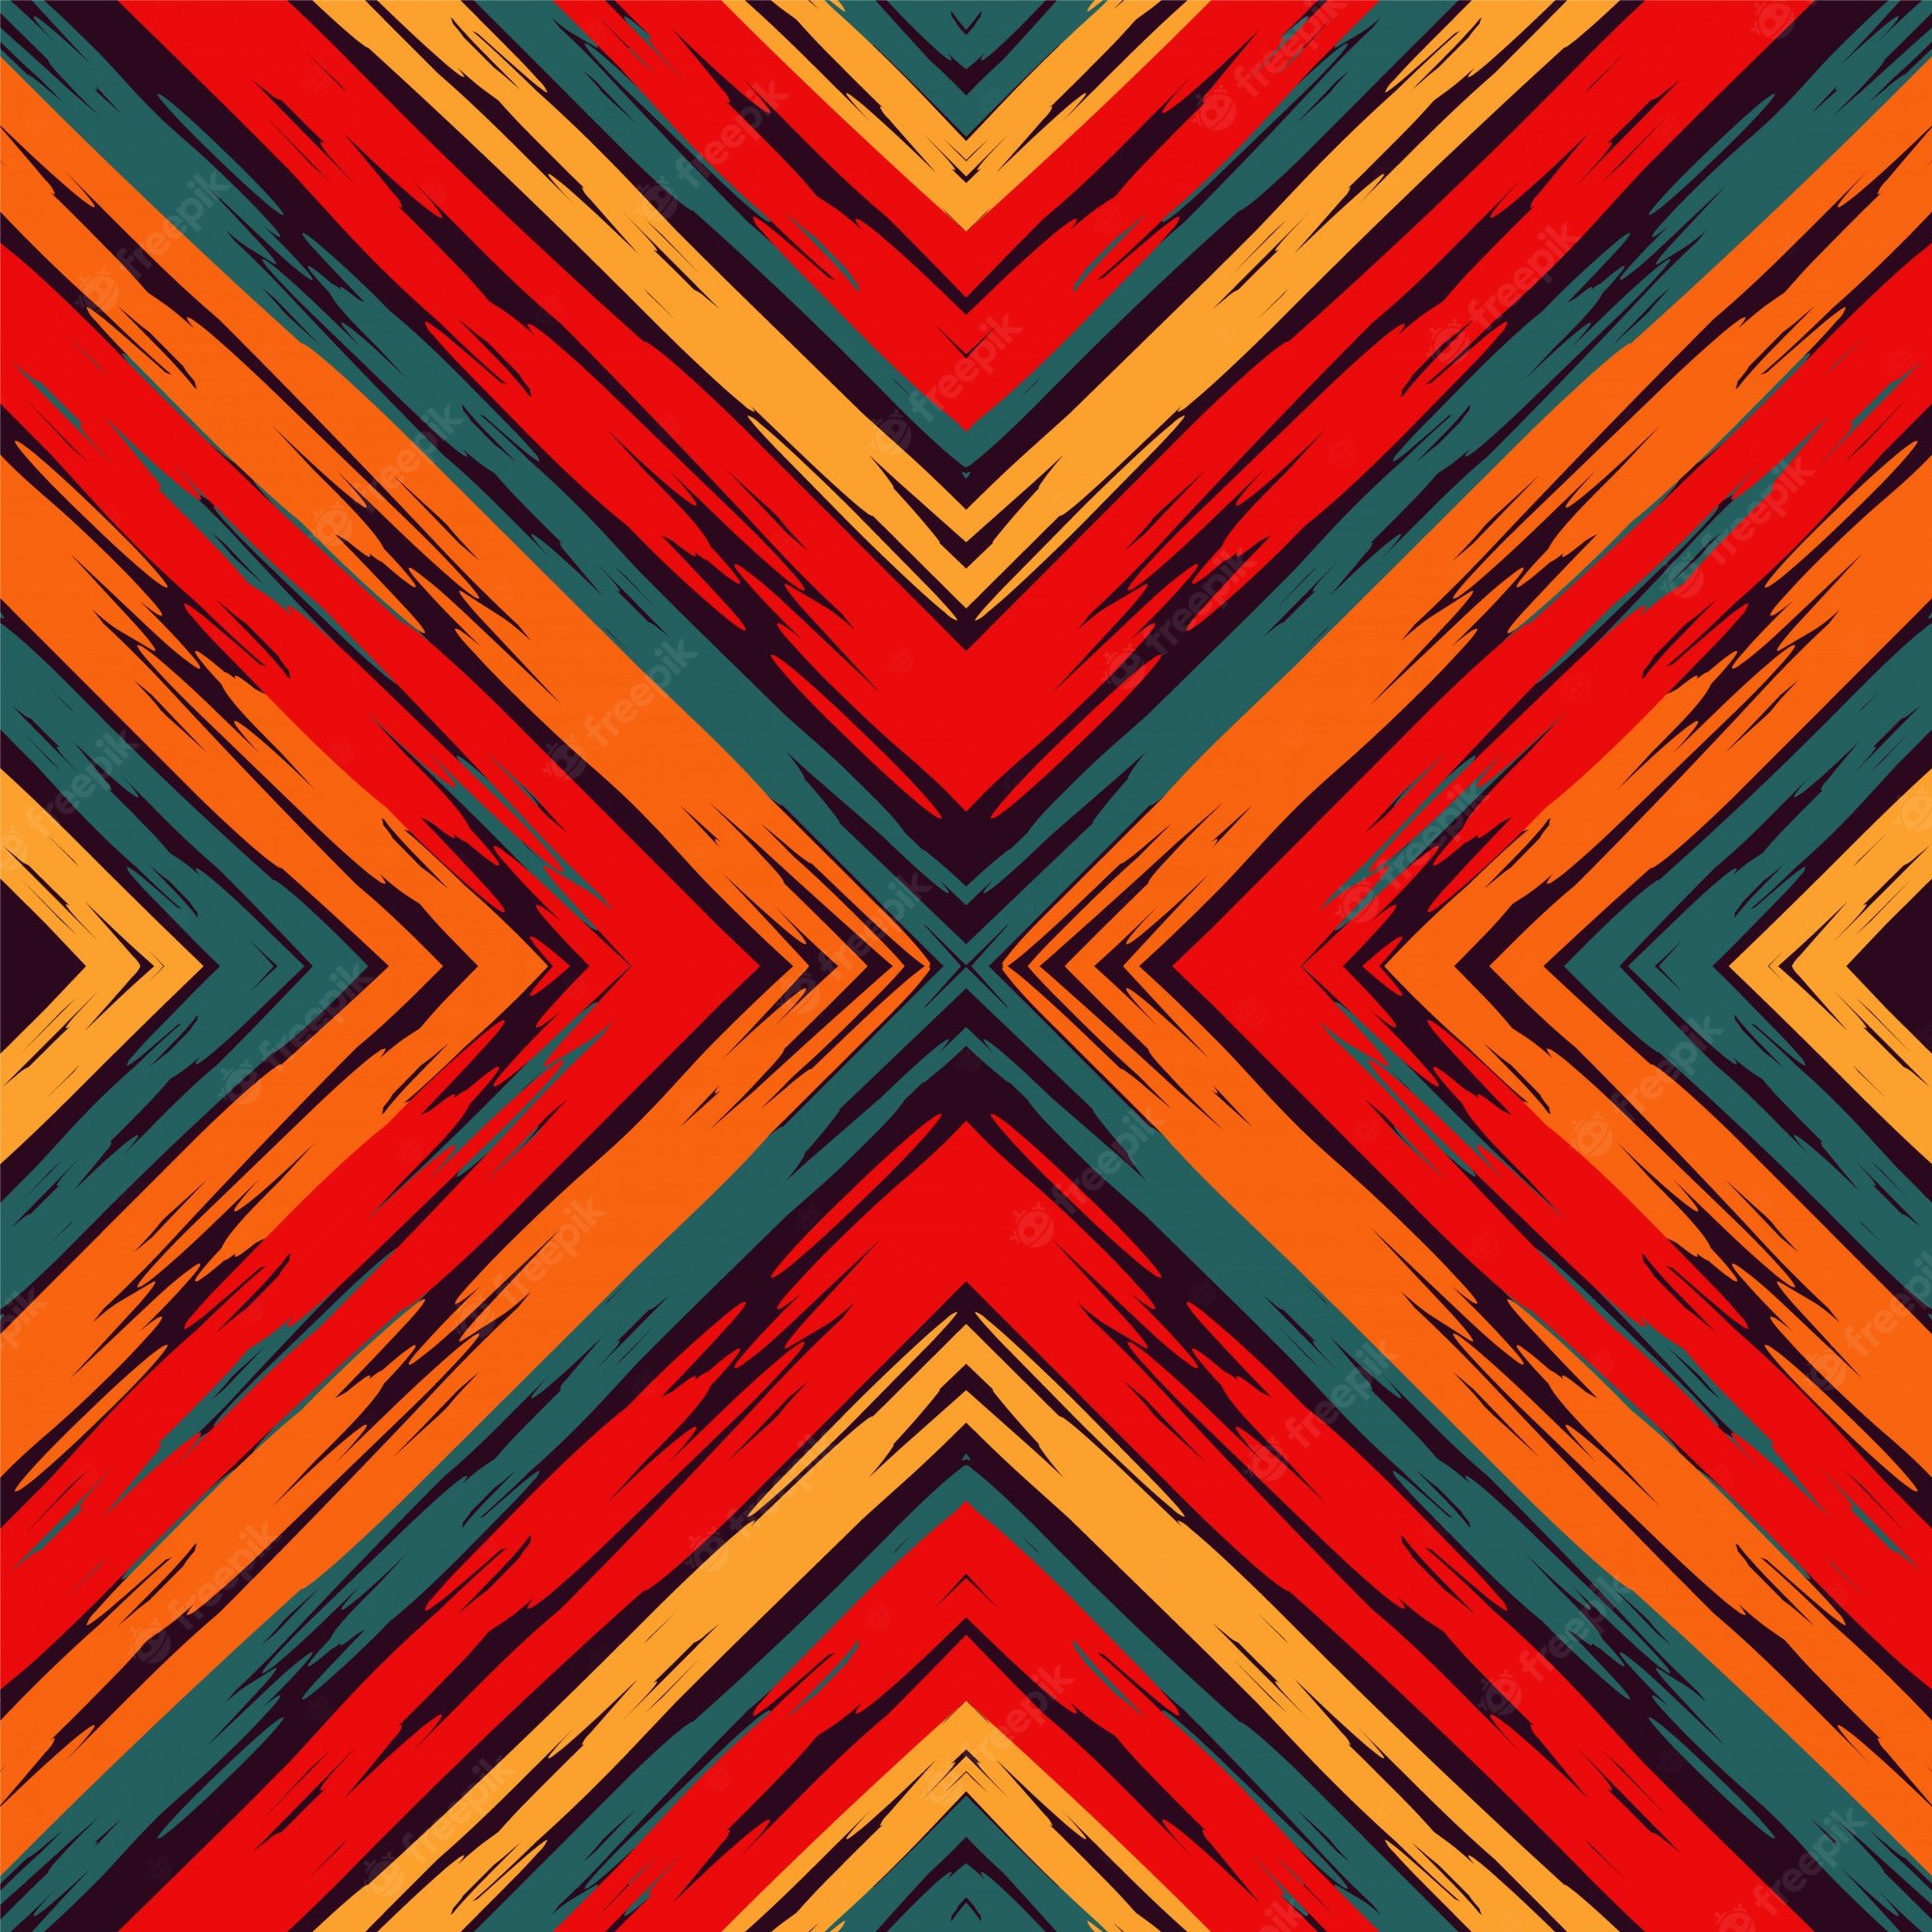 African Pattern Image. Free Vectors, & PSD